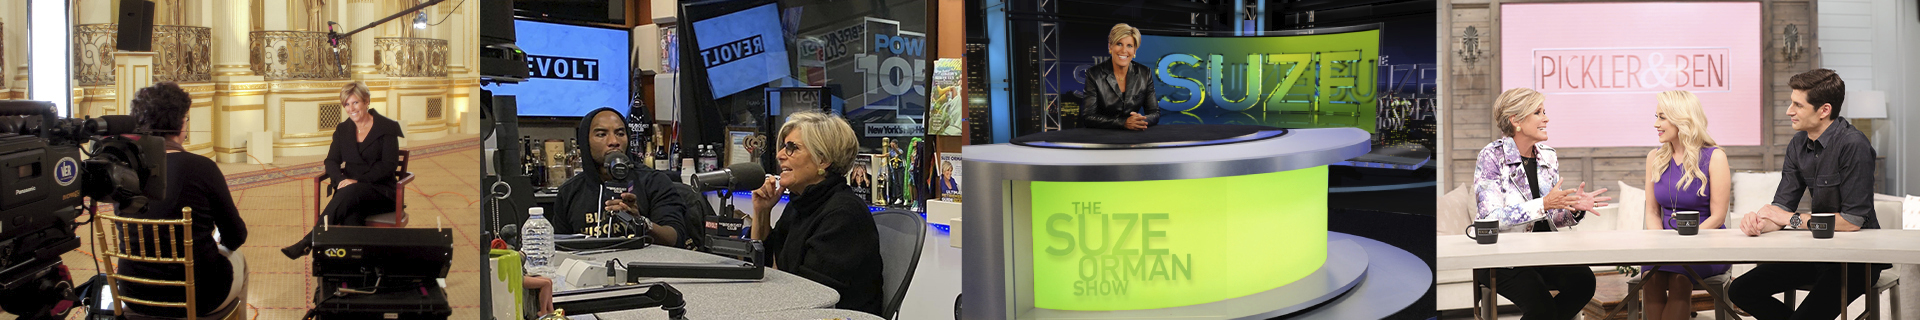 Suze Orman Banner